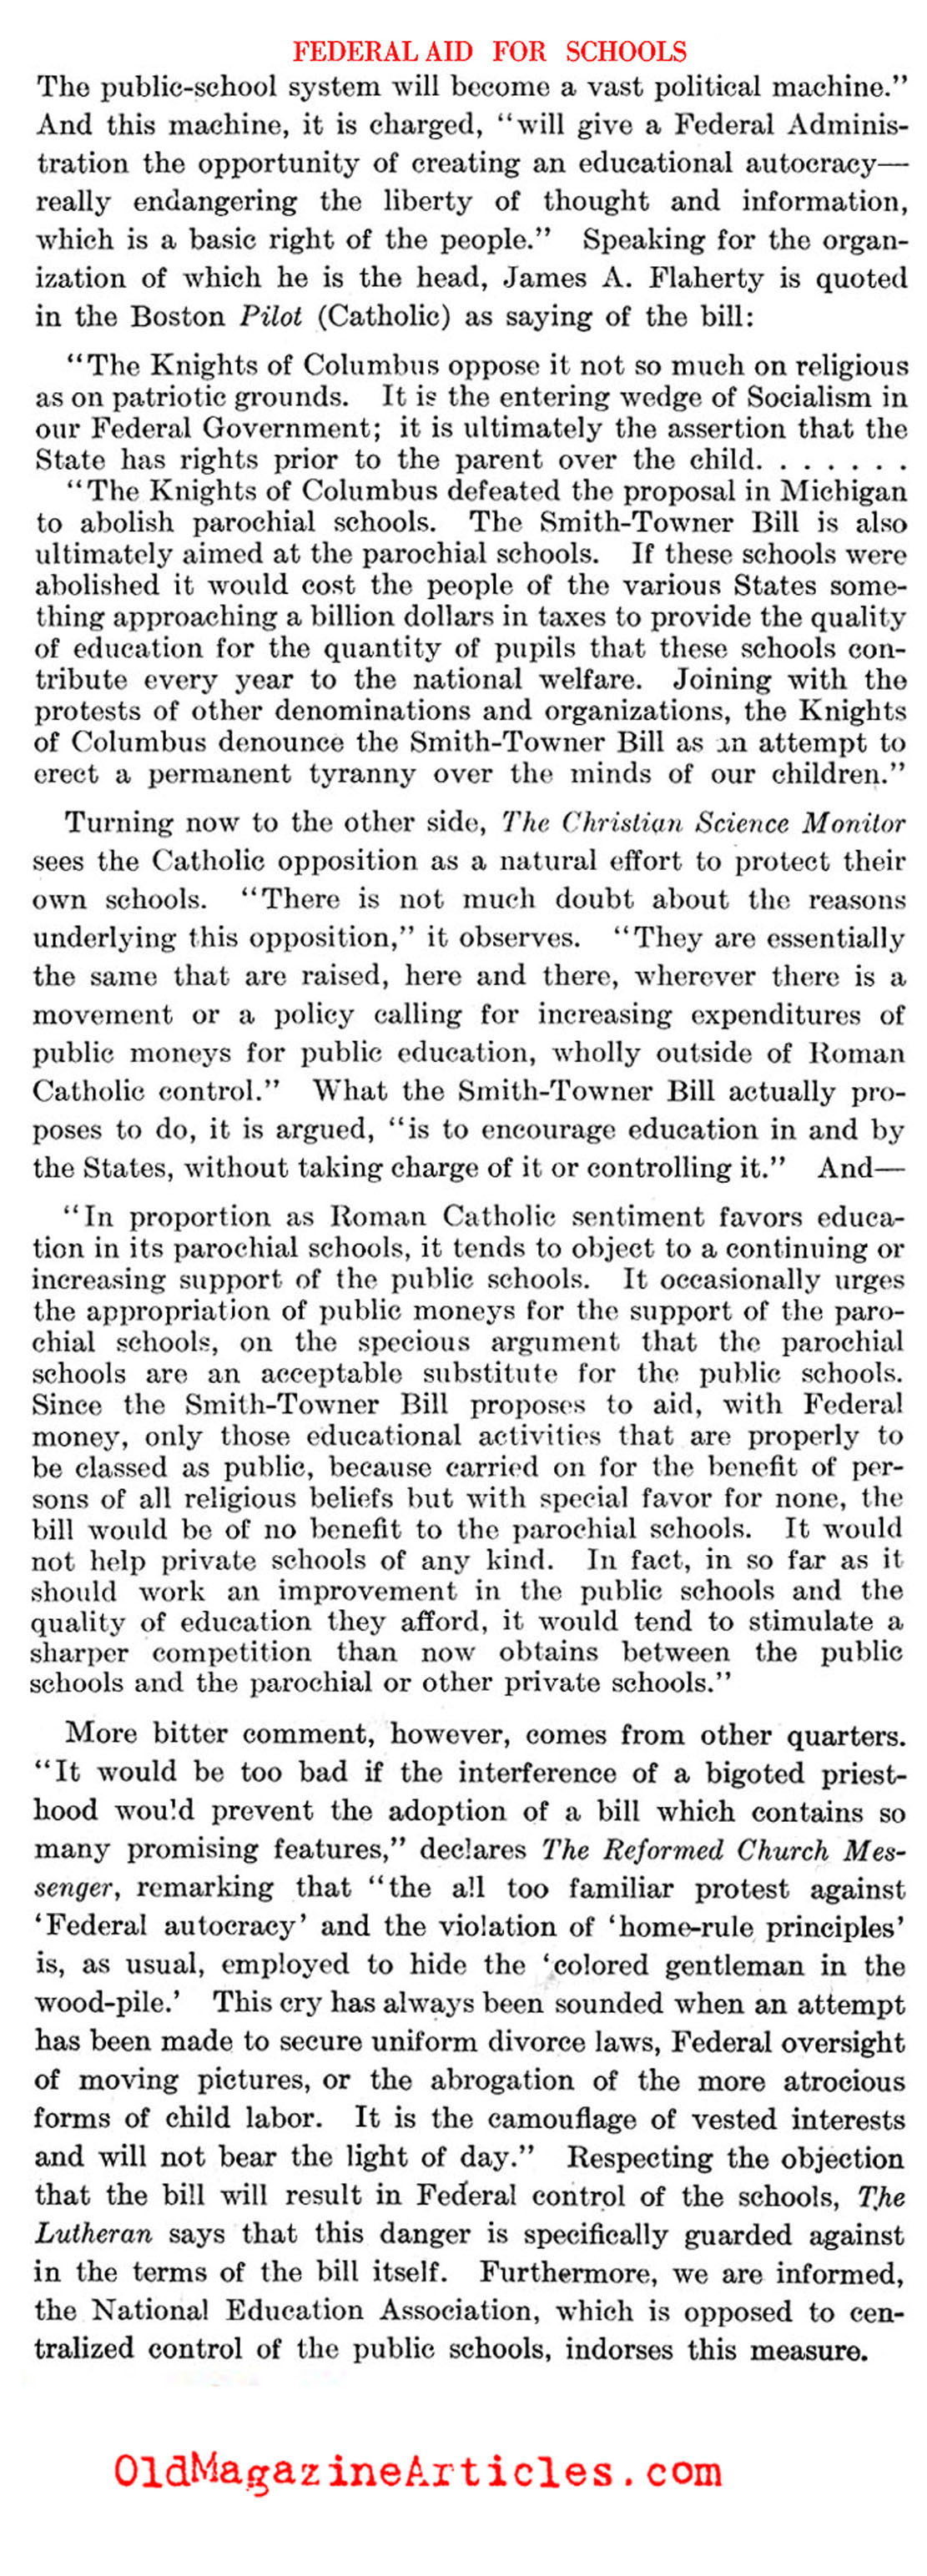 Should the Federal Government Fund Schools <i>at All?</i> (Literary Digest, 1921)